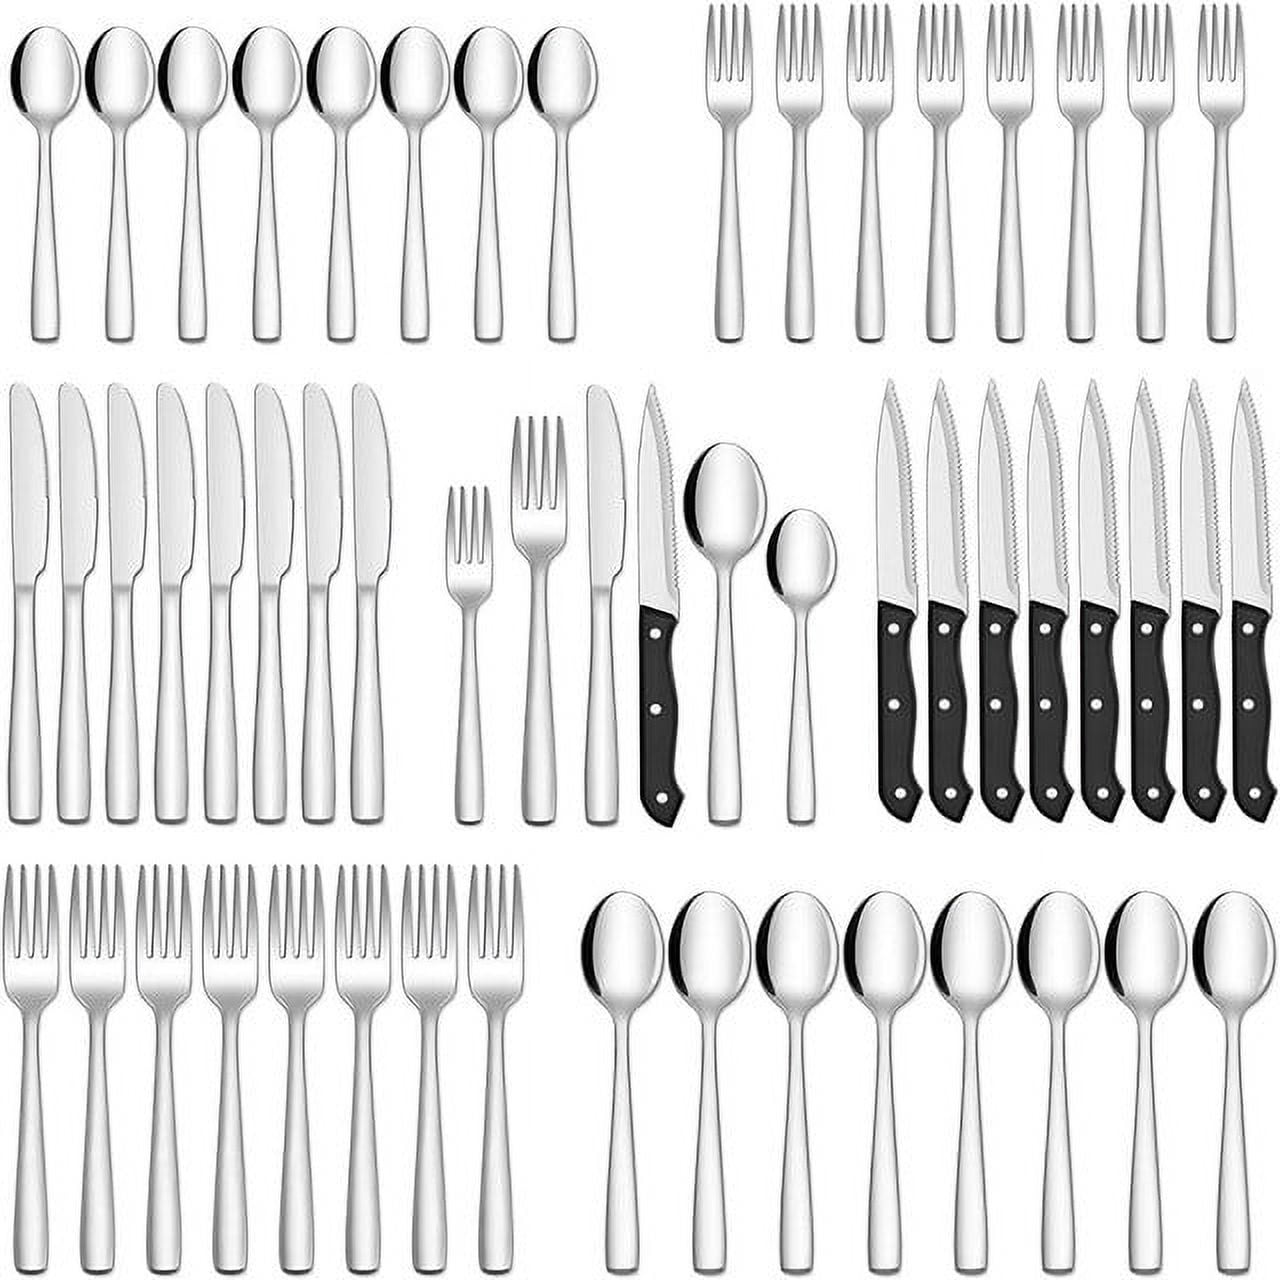 Hiware 24-Piece Silverware Set with Steak Knives, Morocco